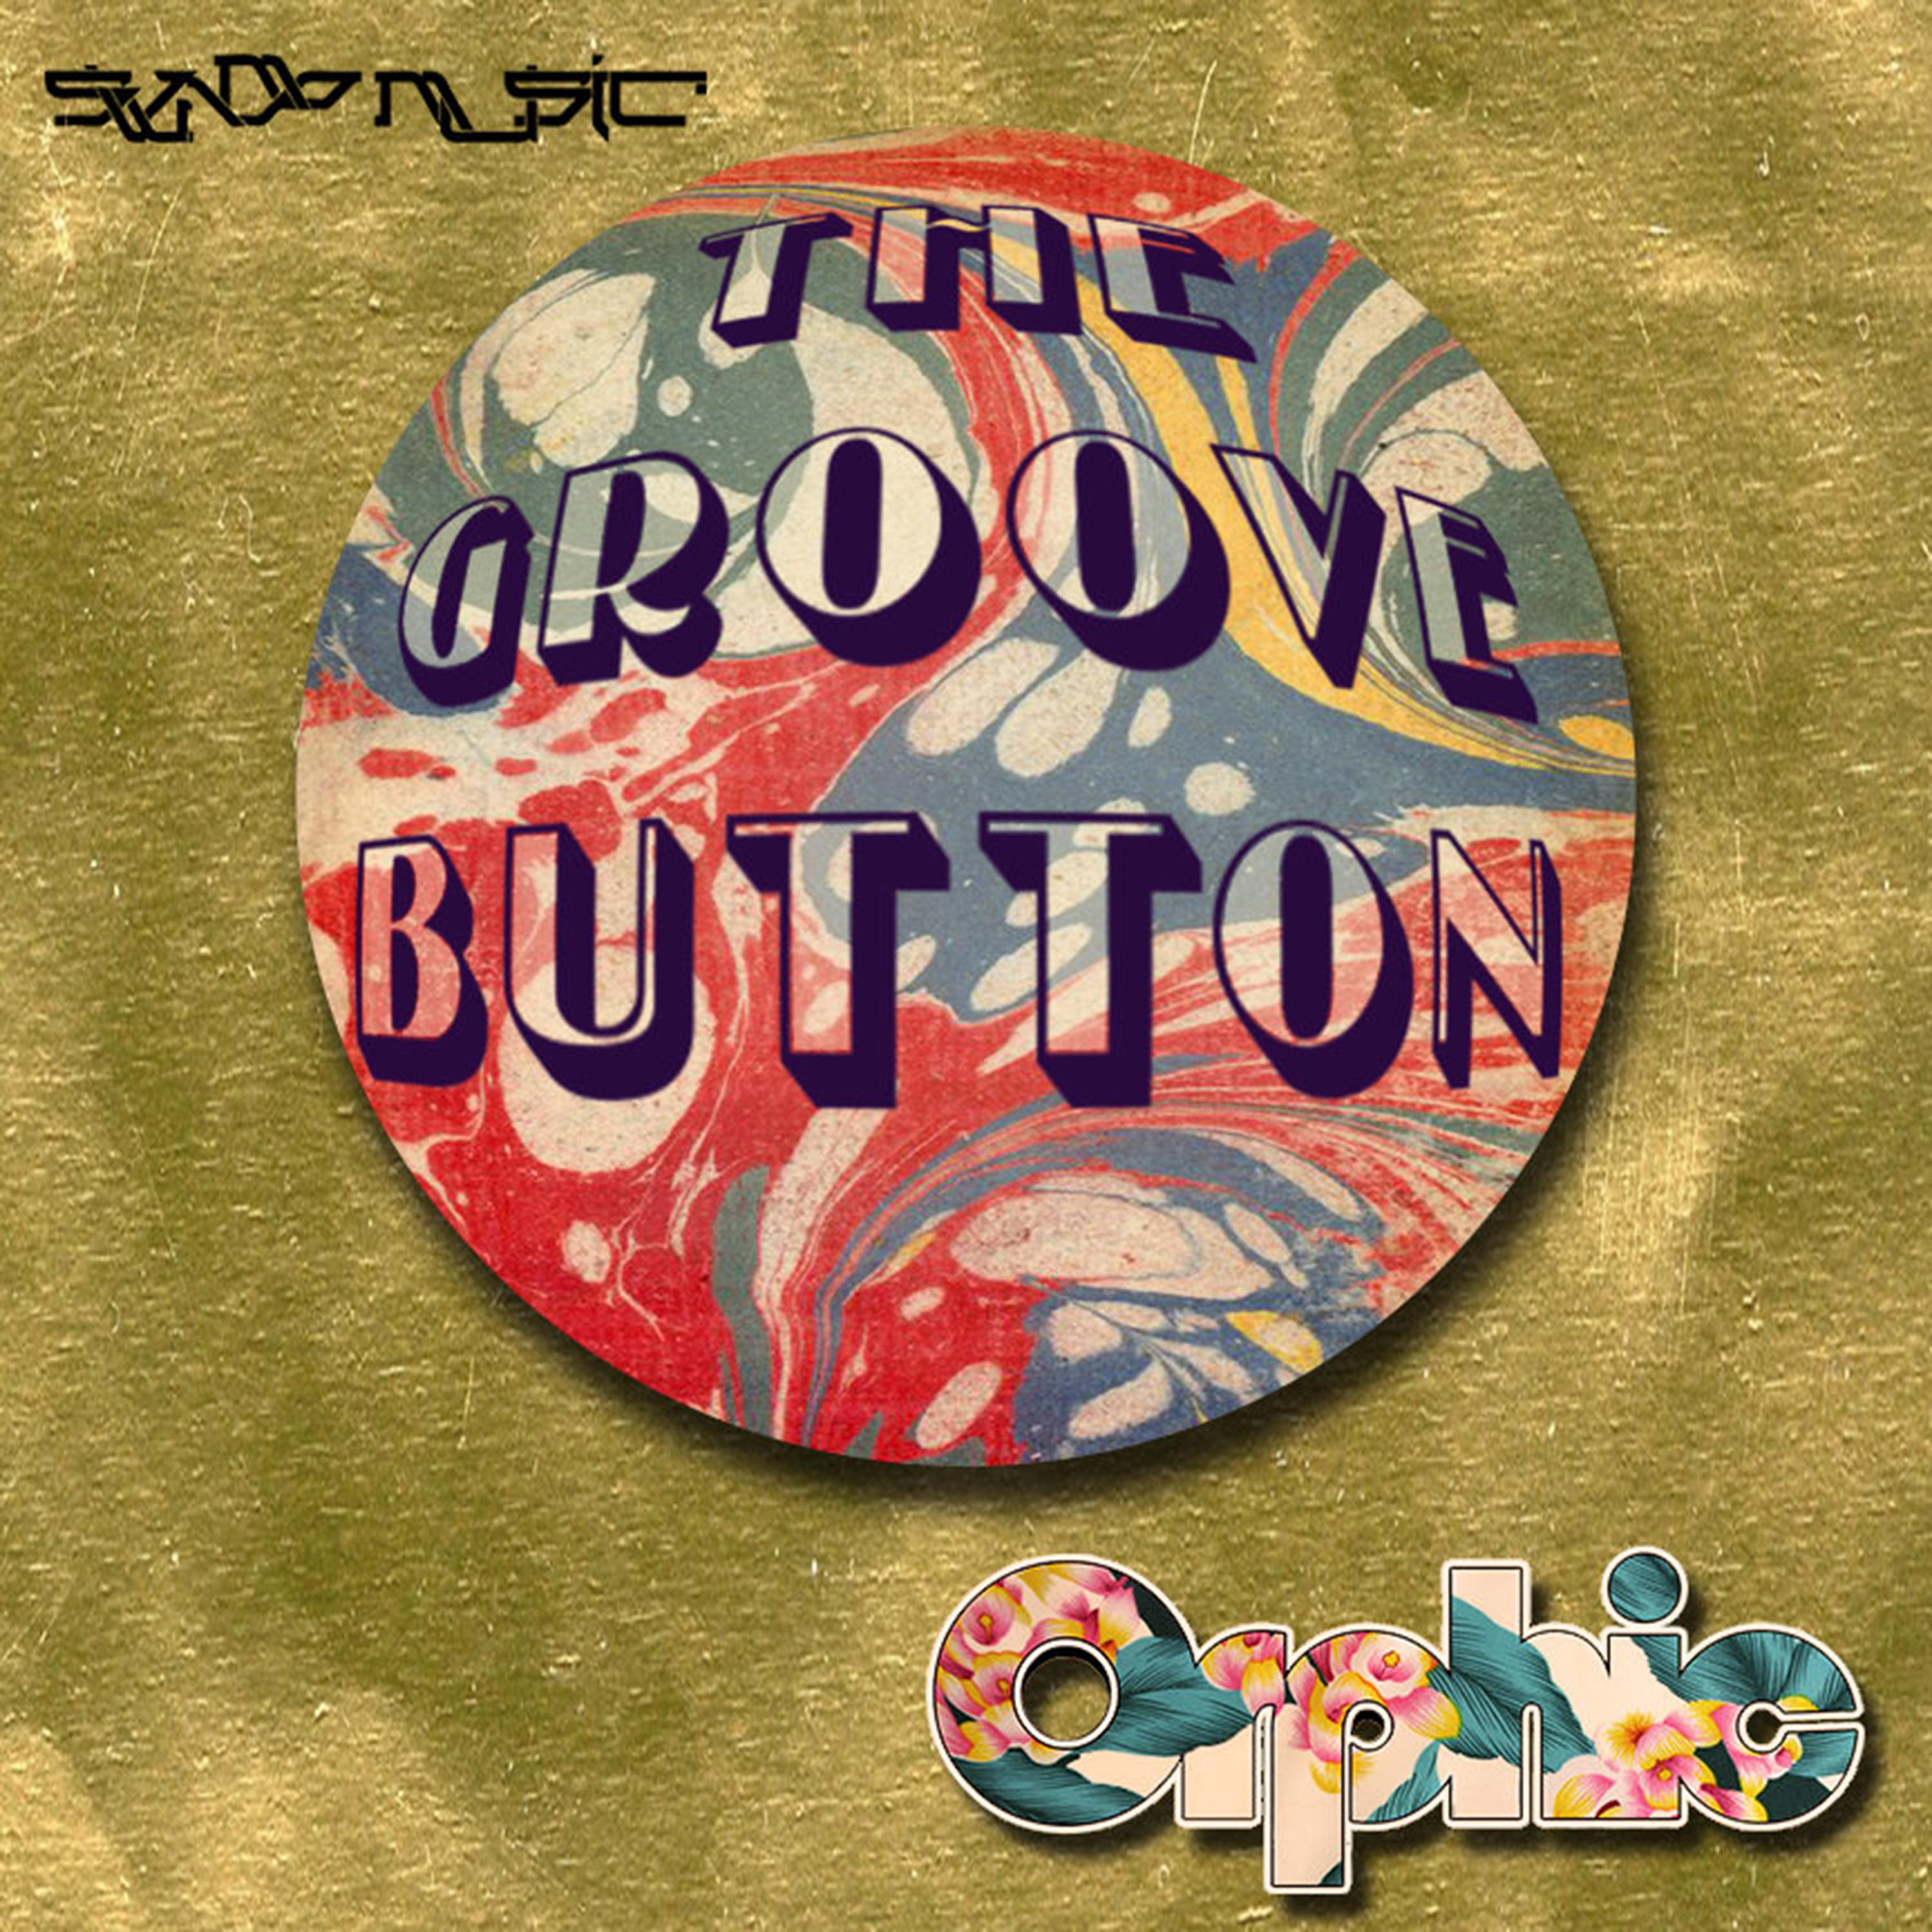 The Groove Button